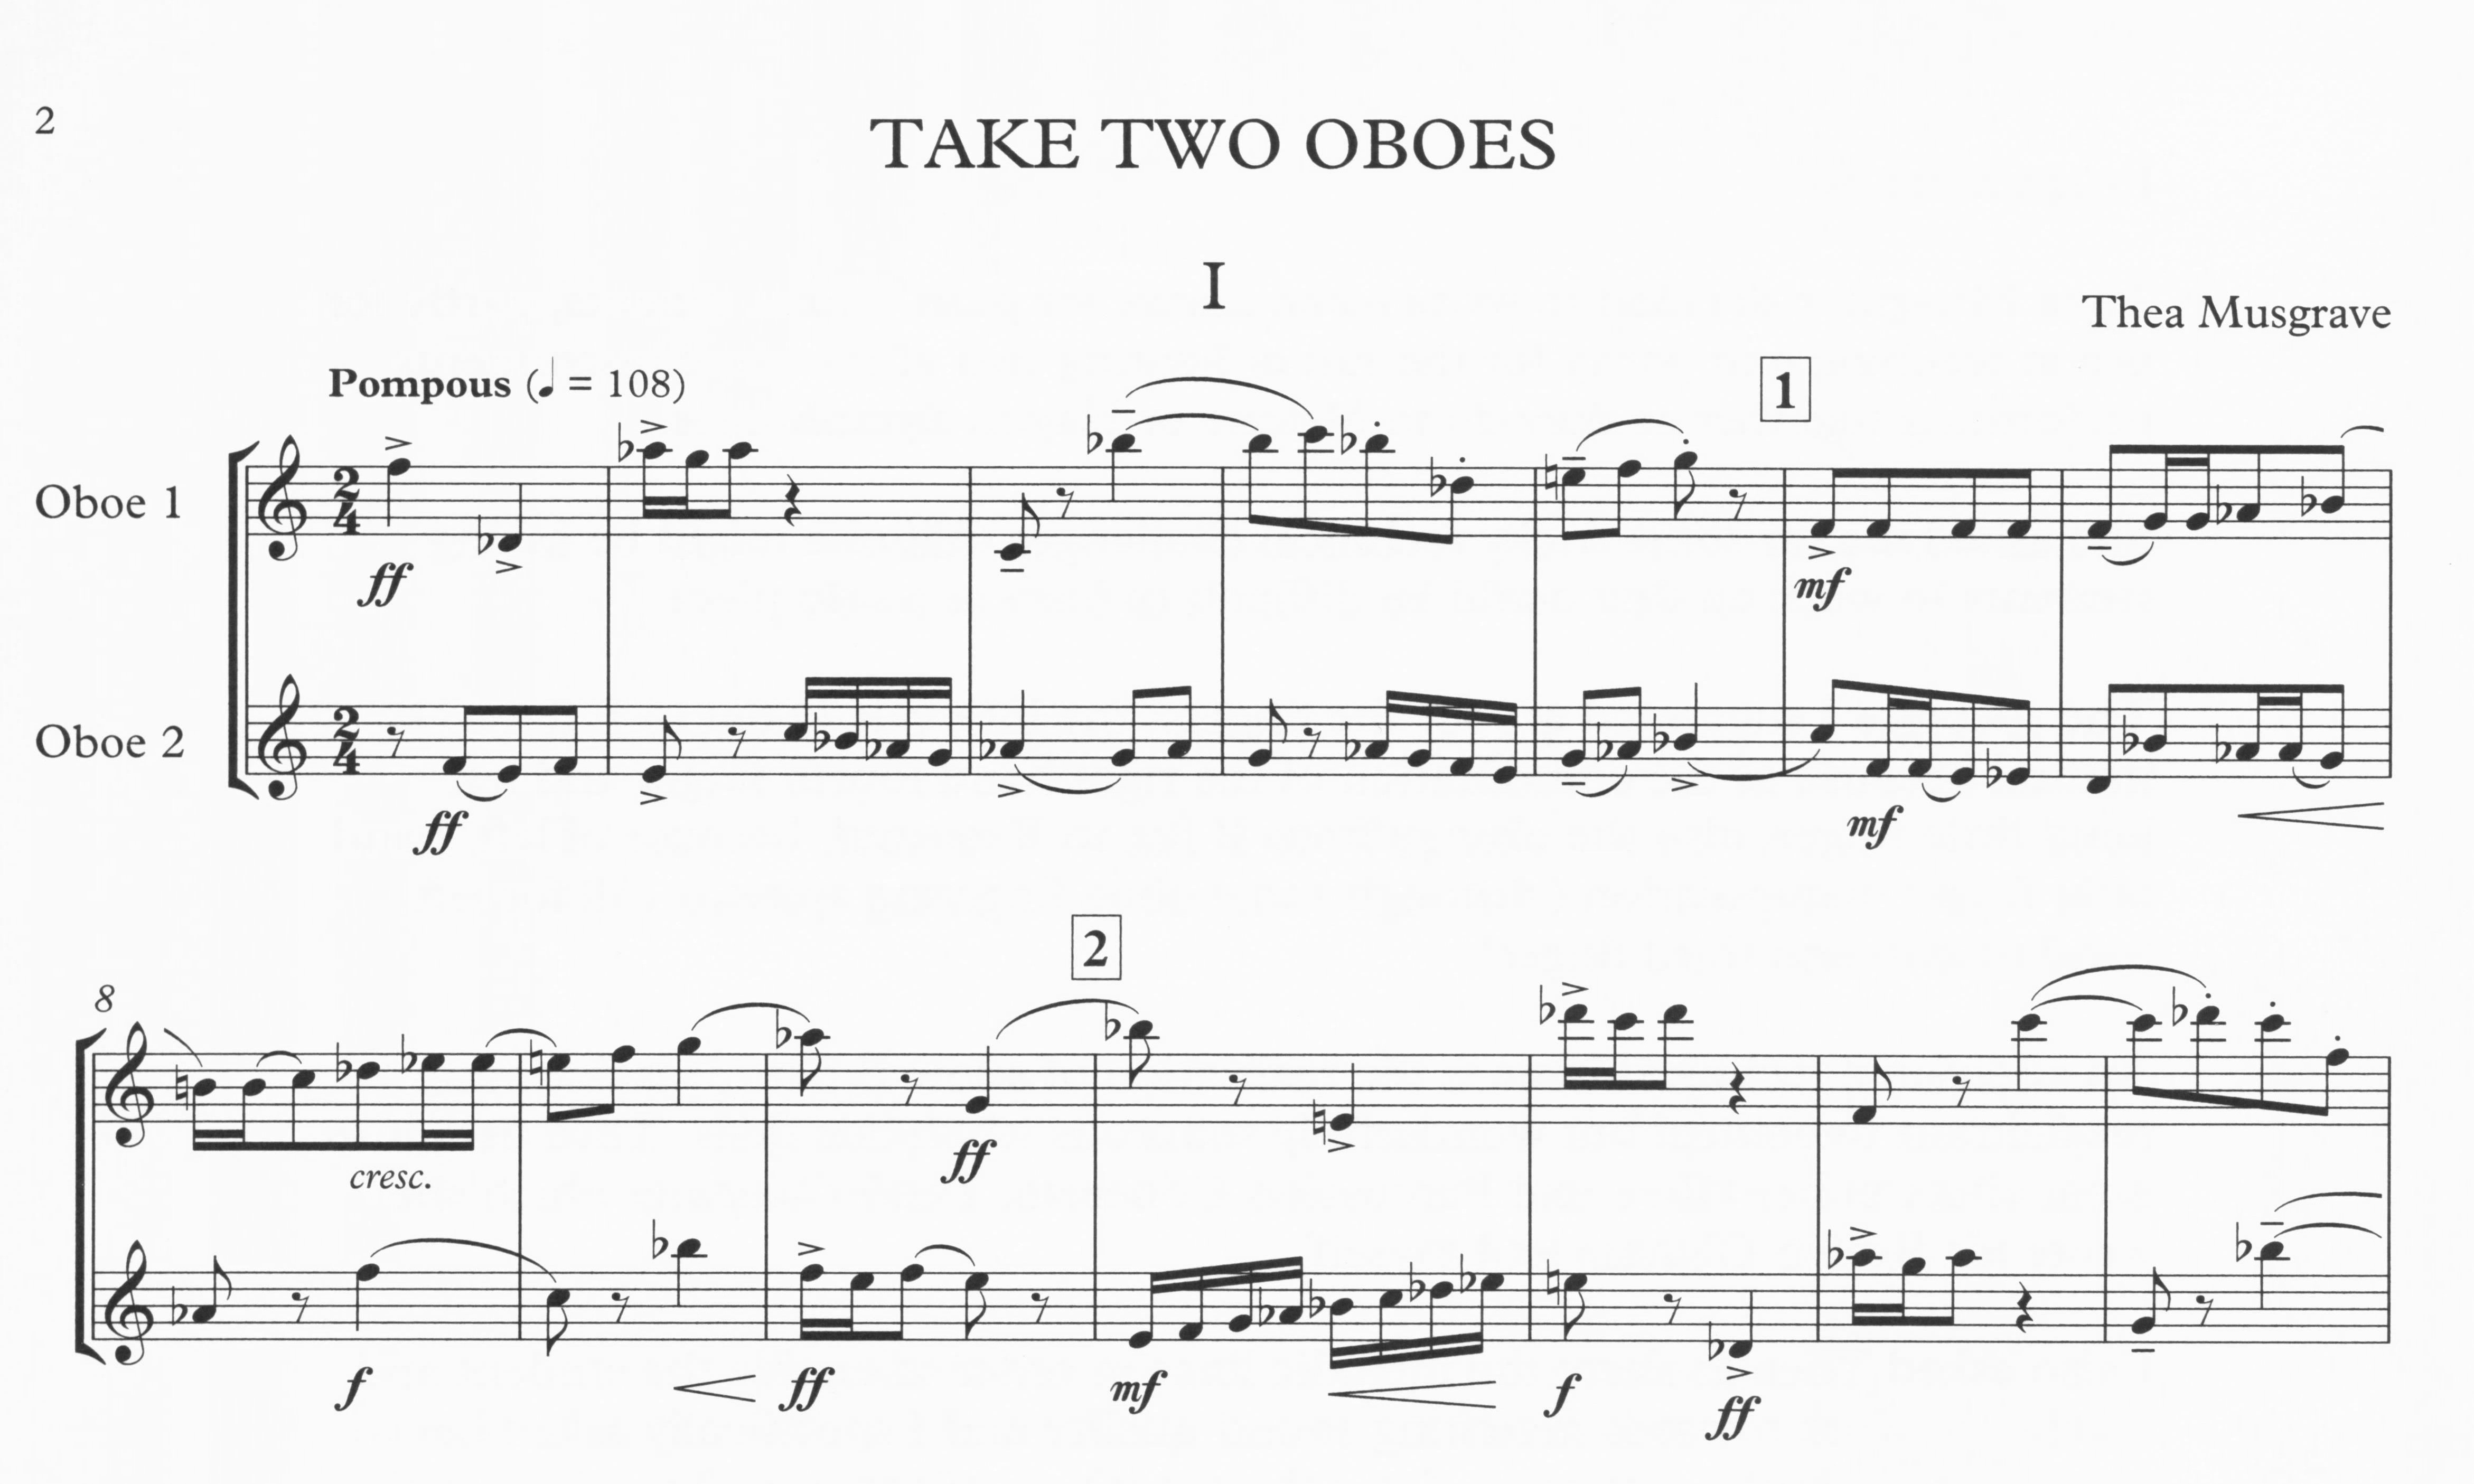 Take Two Oboes - Thea Musgrave